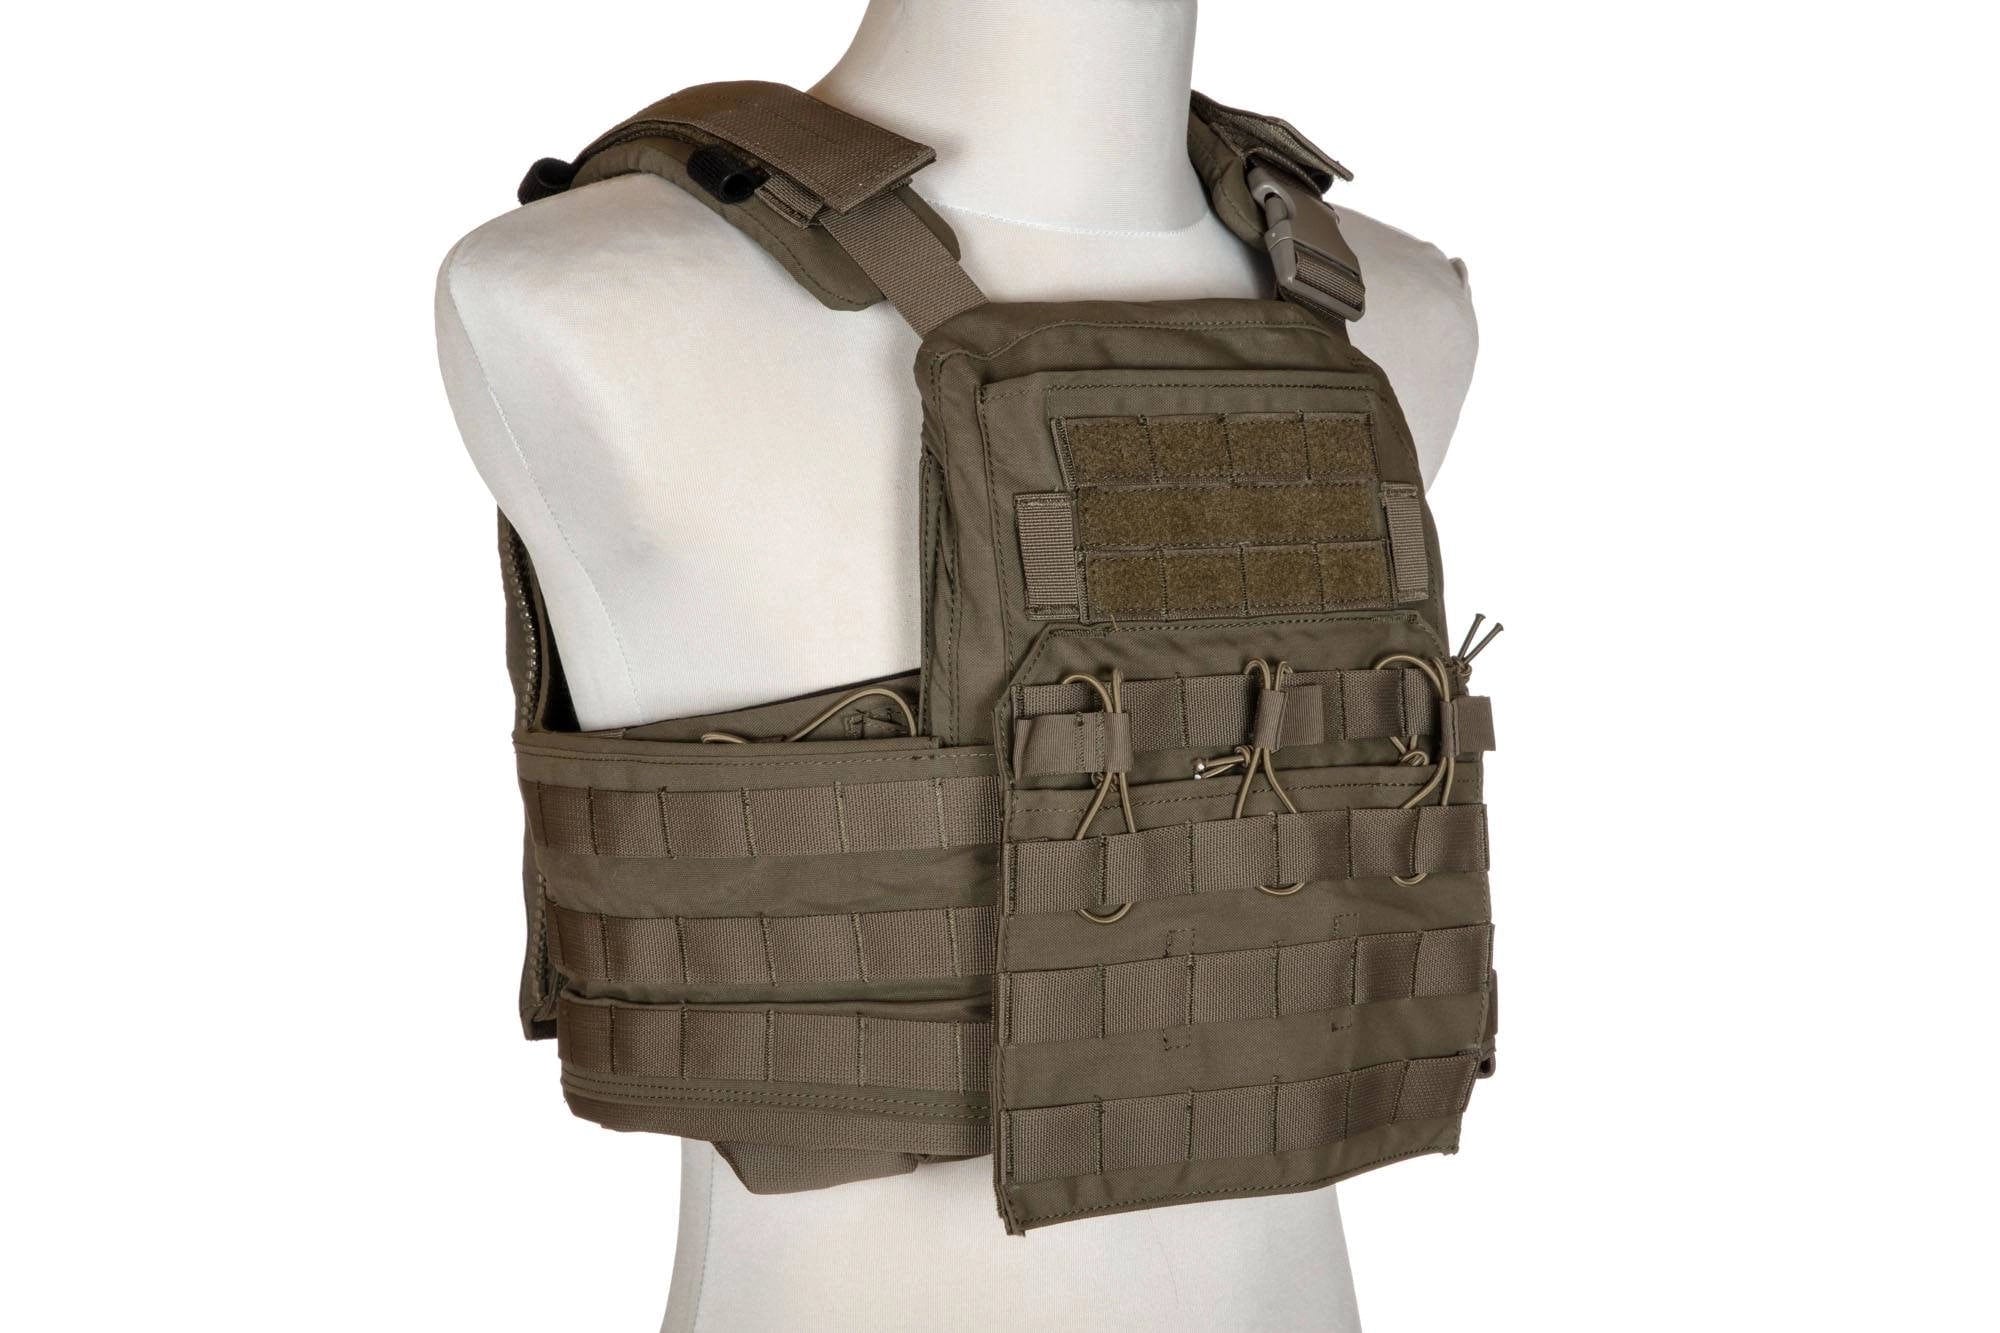 Tactical Vest Heavy Plate Carrier Modon - Olive